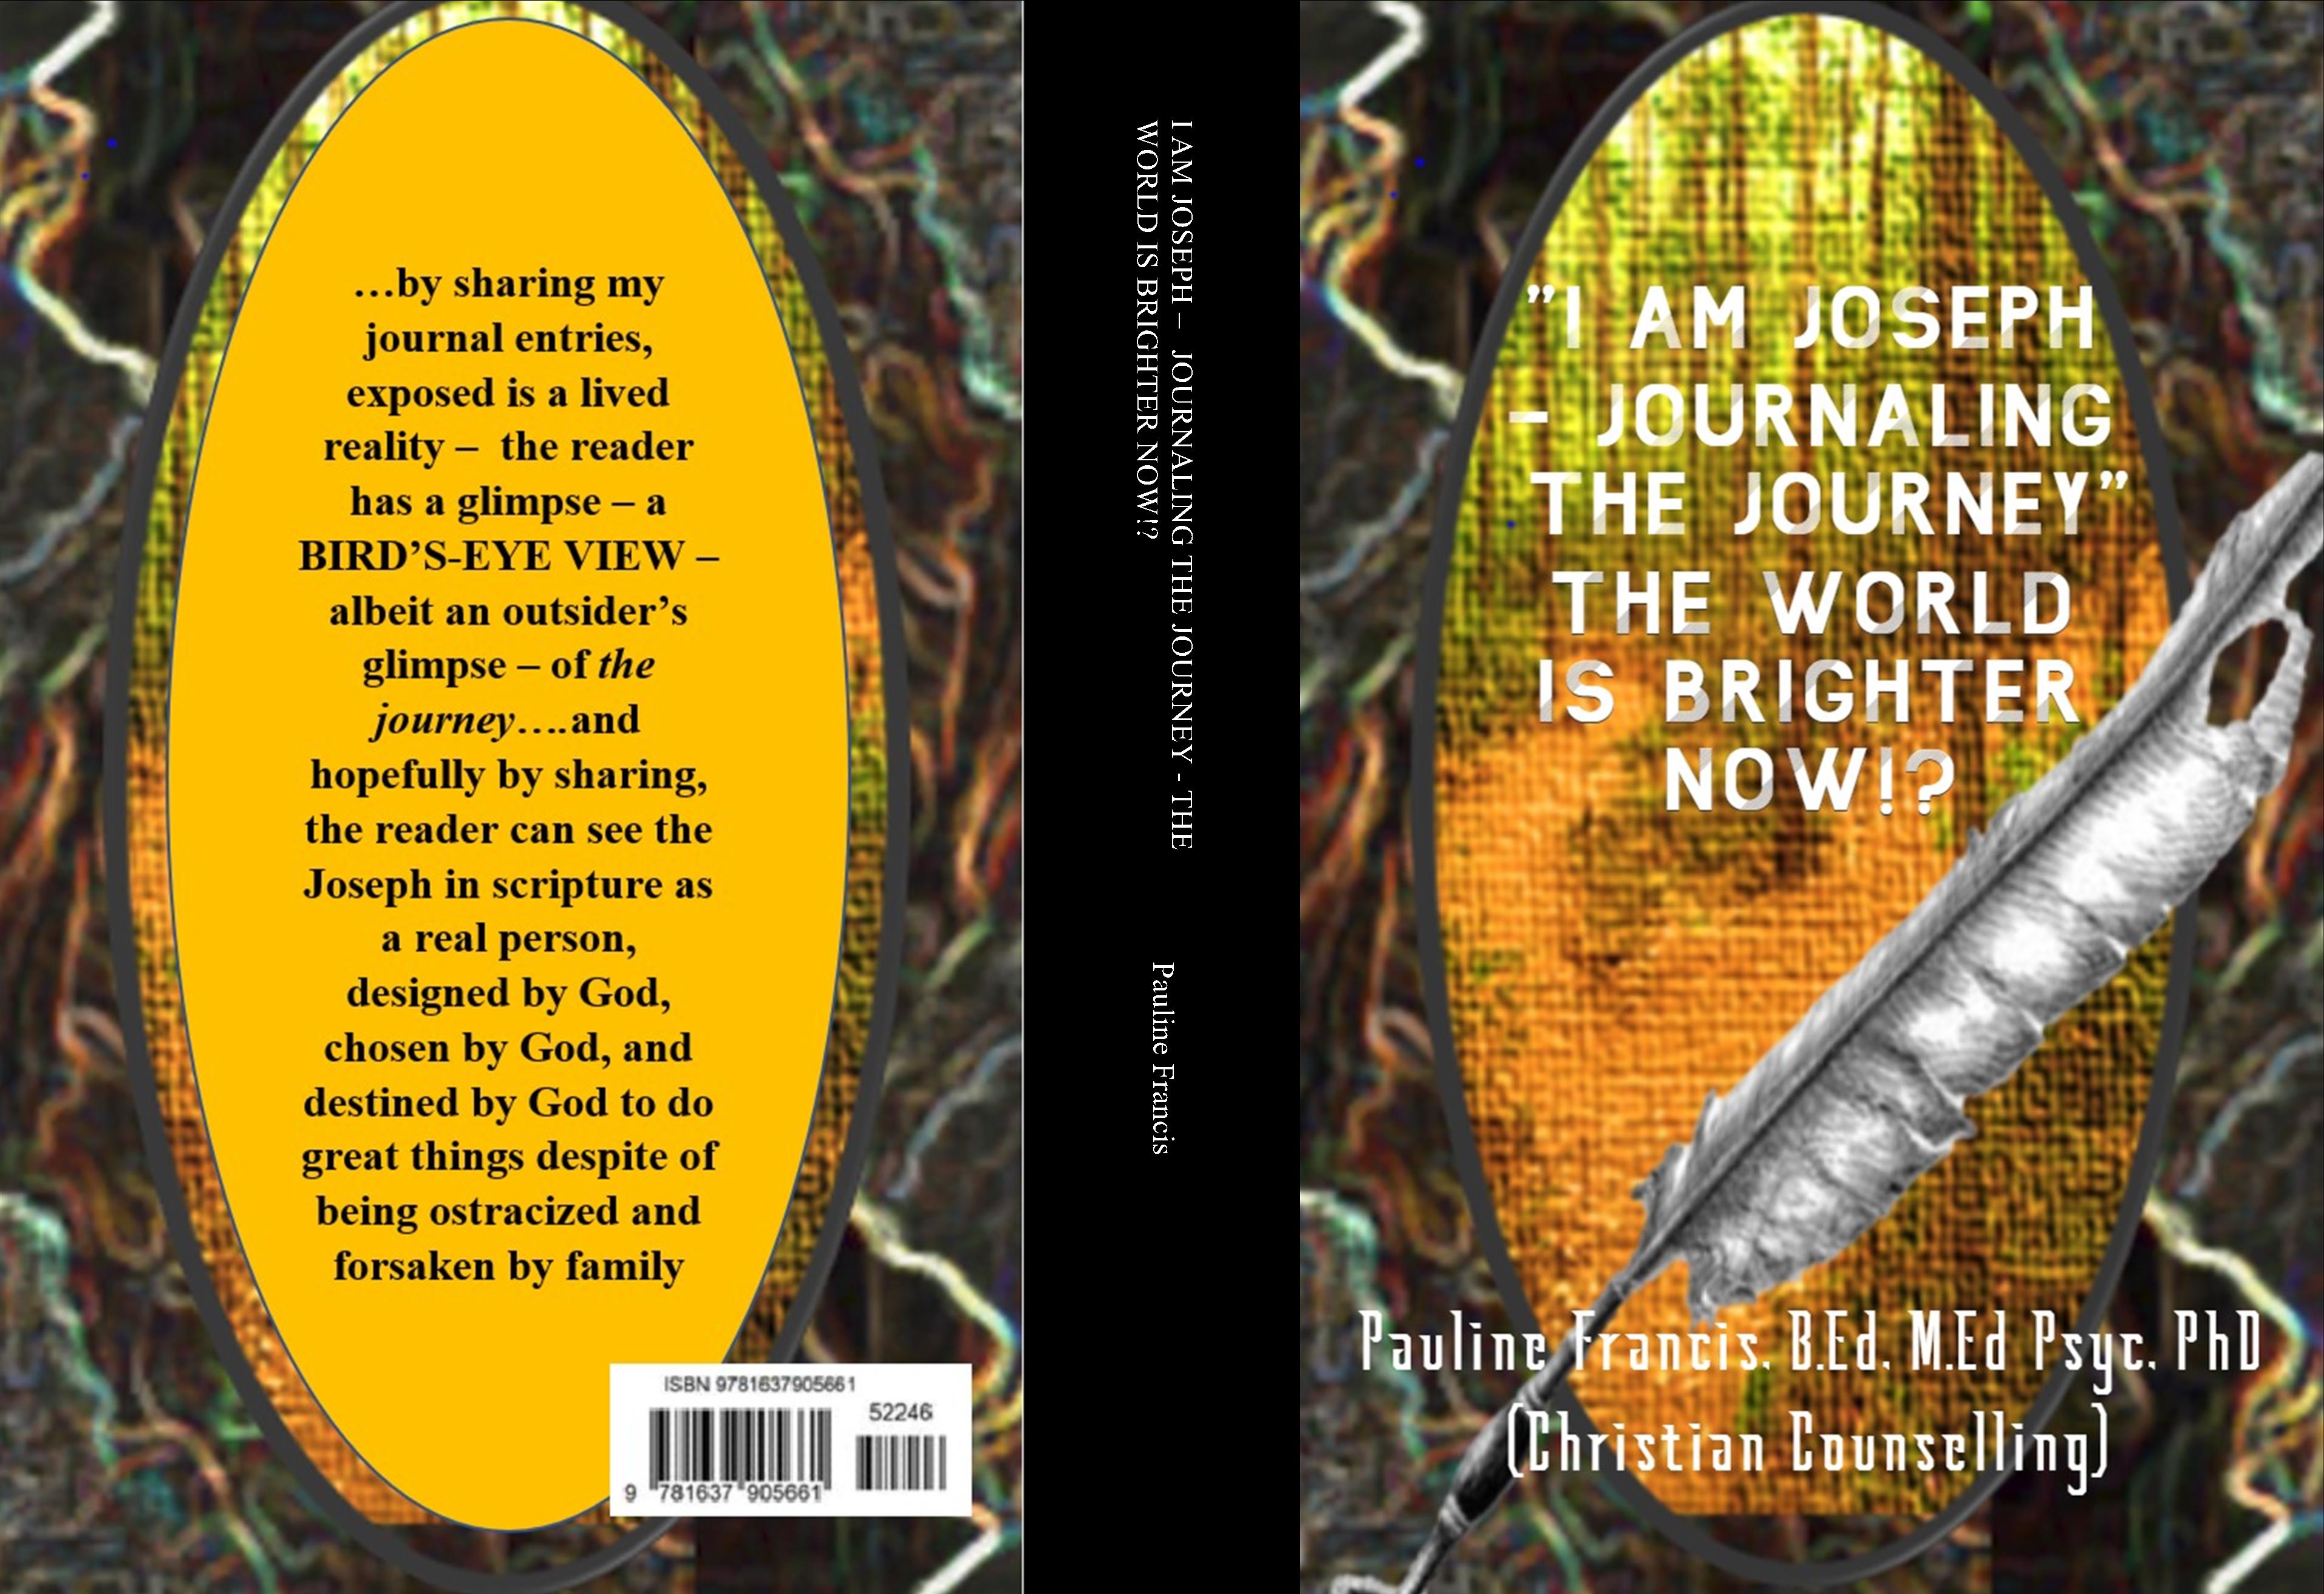 "I AM JOSEPH – JOURNALING THE JOURNEY" ~THE WORLD IS BRIGHTER NOW!?~ cover image